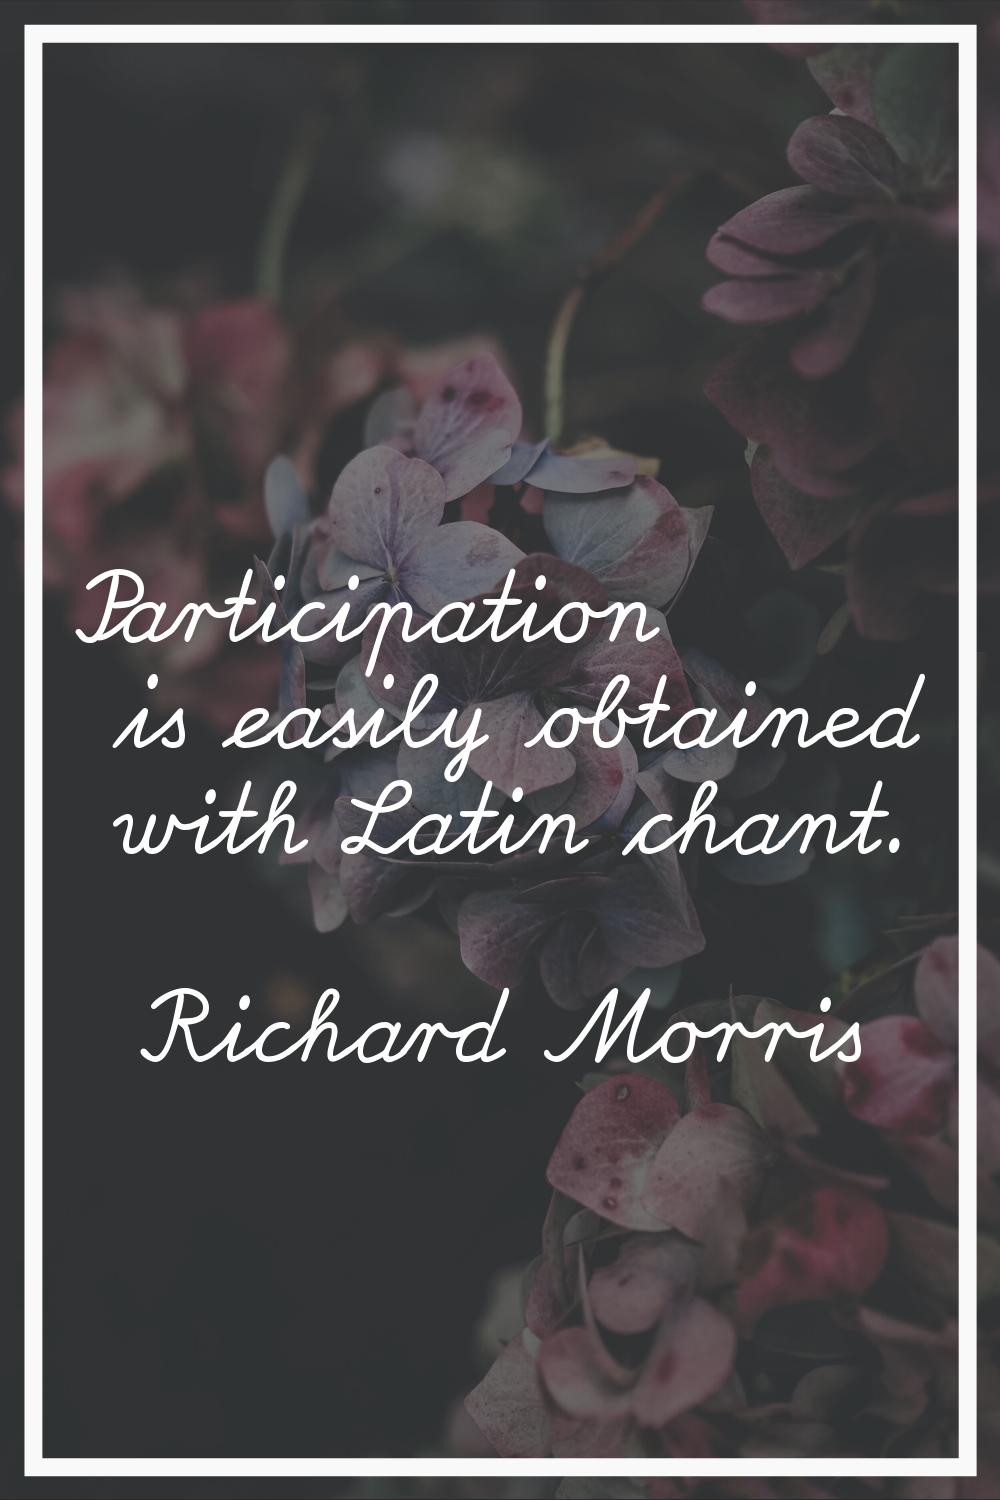 Participation is easily obtained with Latin chant.